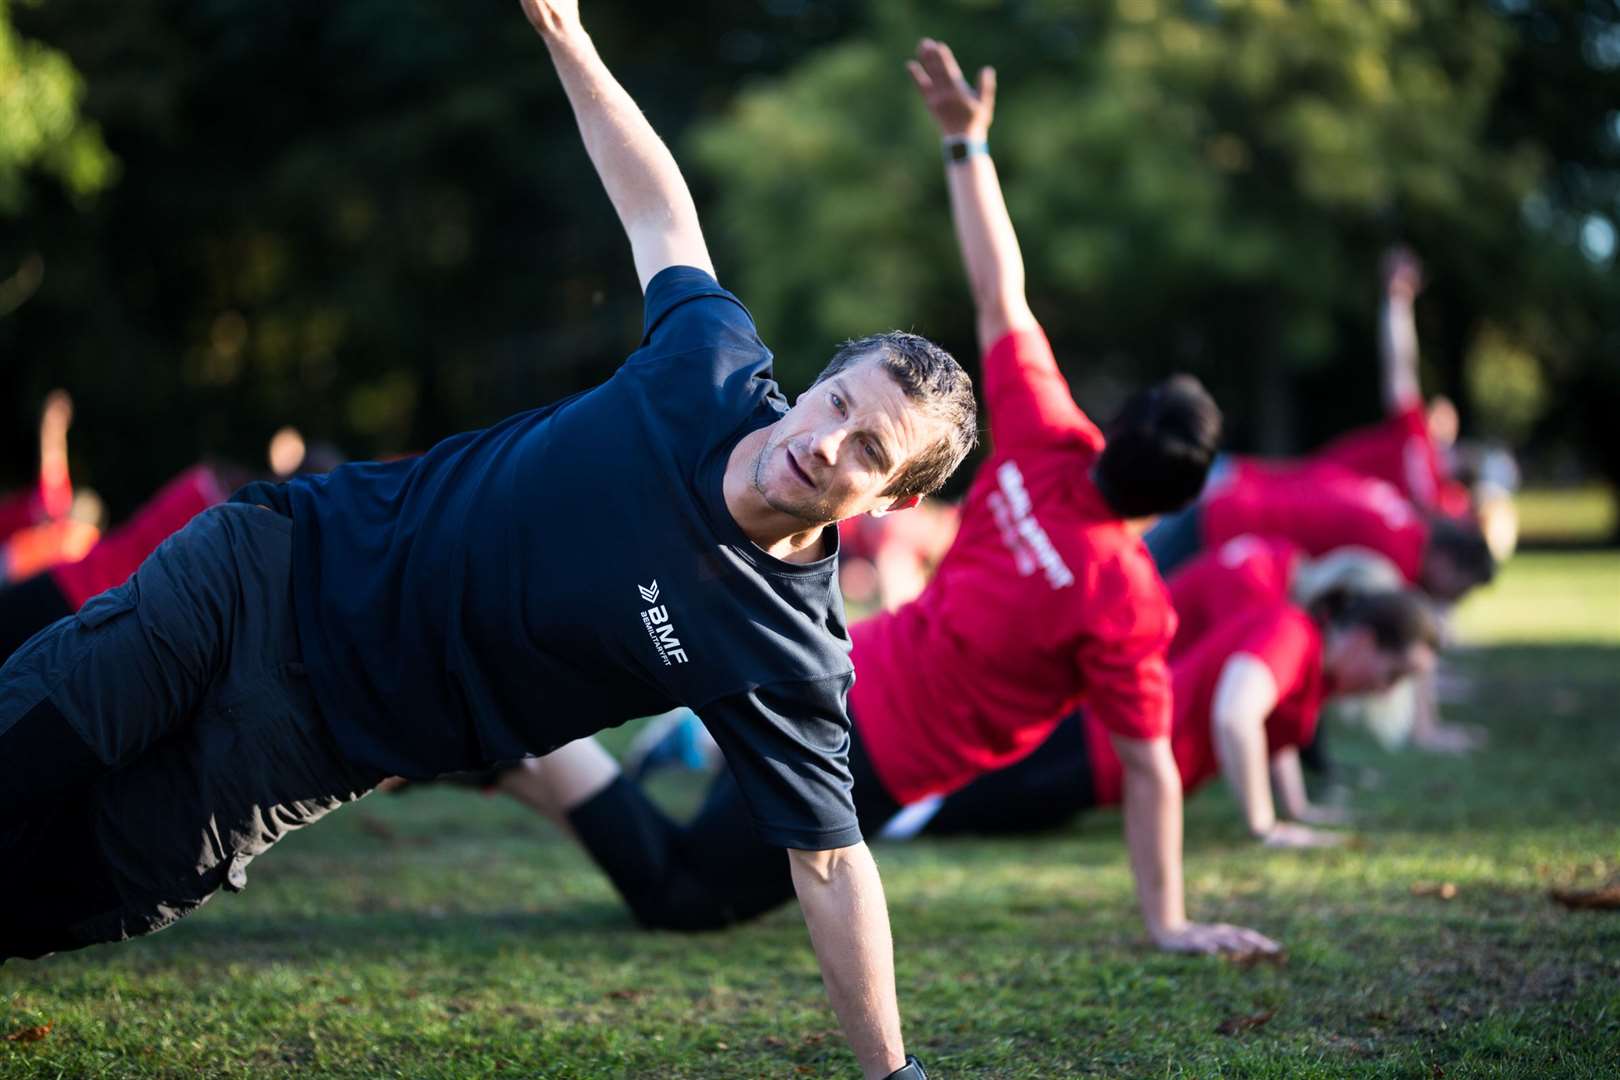 Be Military Fit have teamed up with the Royal British Legion Industries to host a military challenge at Mote Park